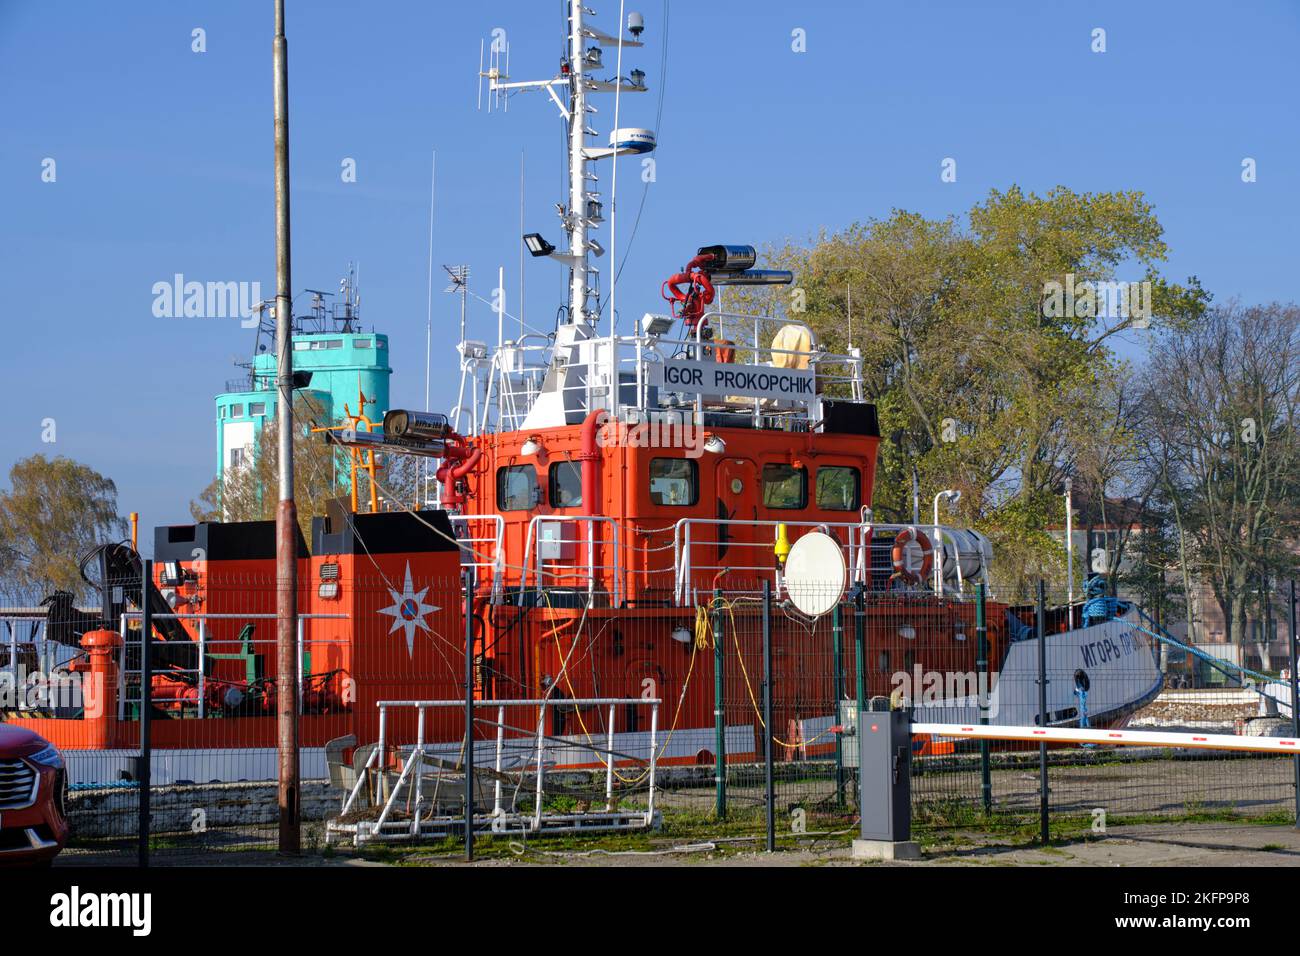 Kaliningrad, Russia, October 28, 2022.Boat Emergency rescue service for carrying out underwater work special purpose Igor Prokopchik Stock Photo